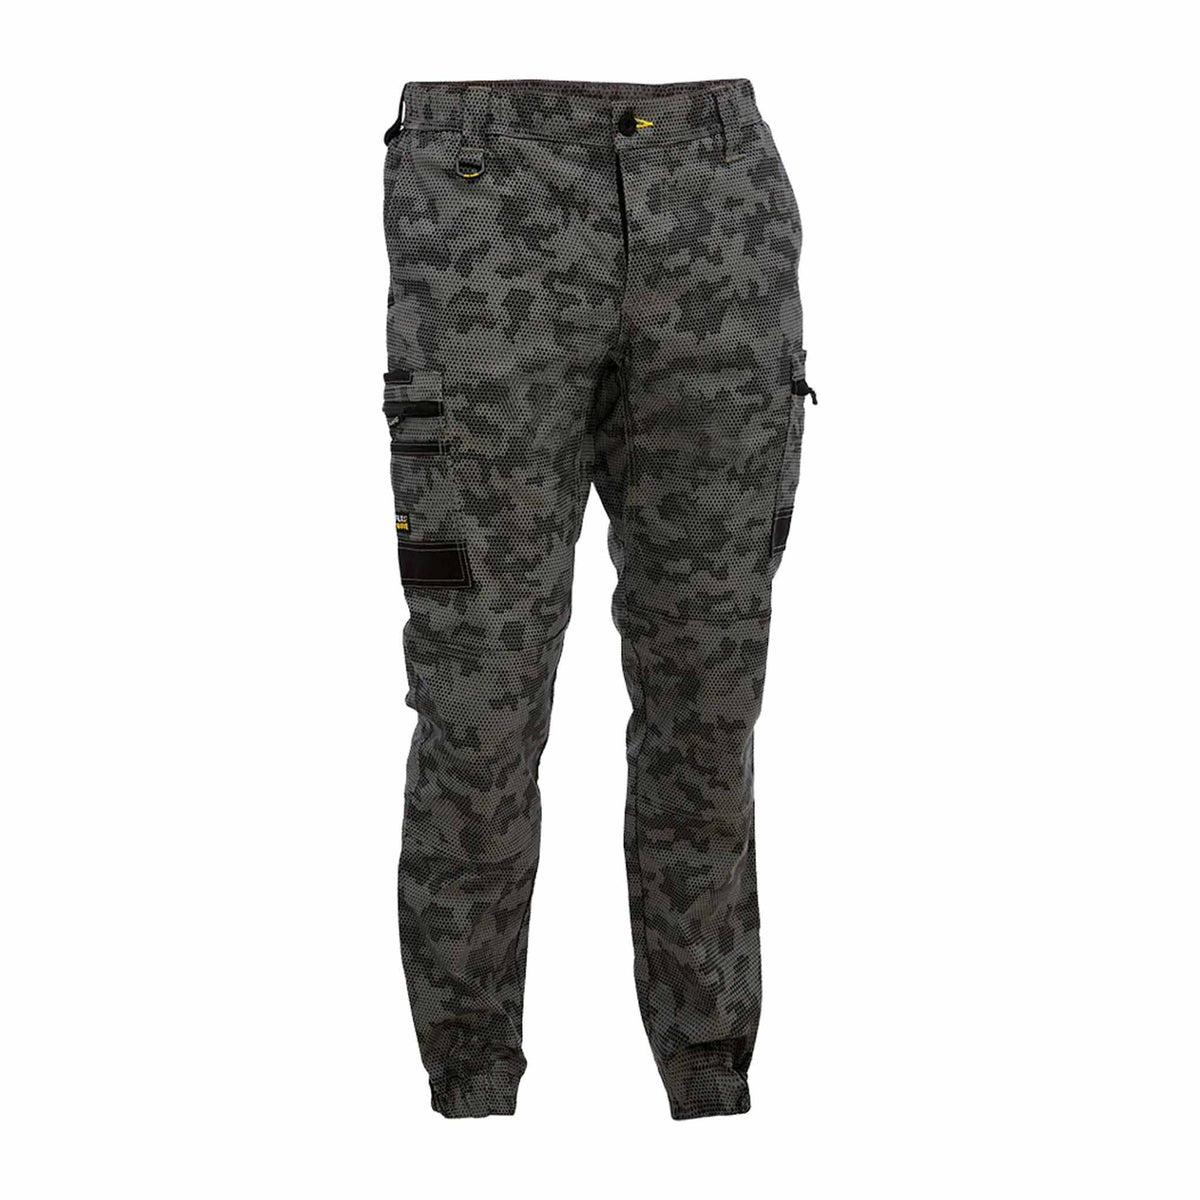 bisley flx and move stretch camo cargo pants in charcoal honeycomb